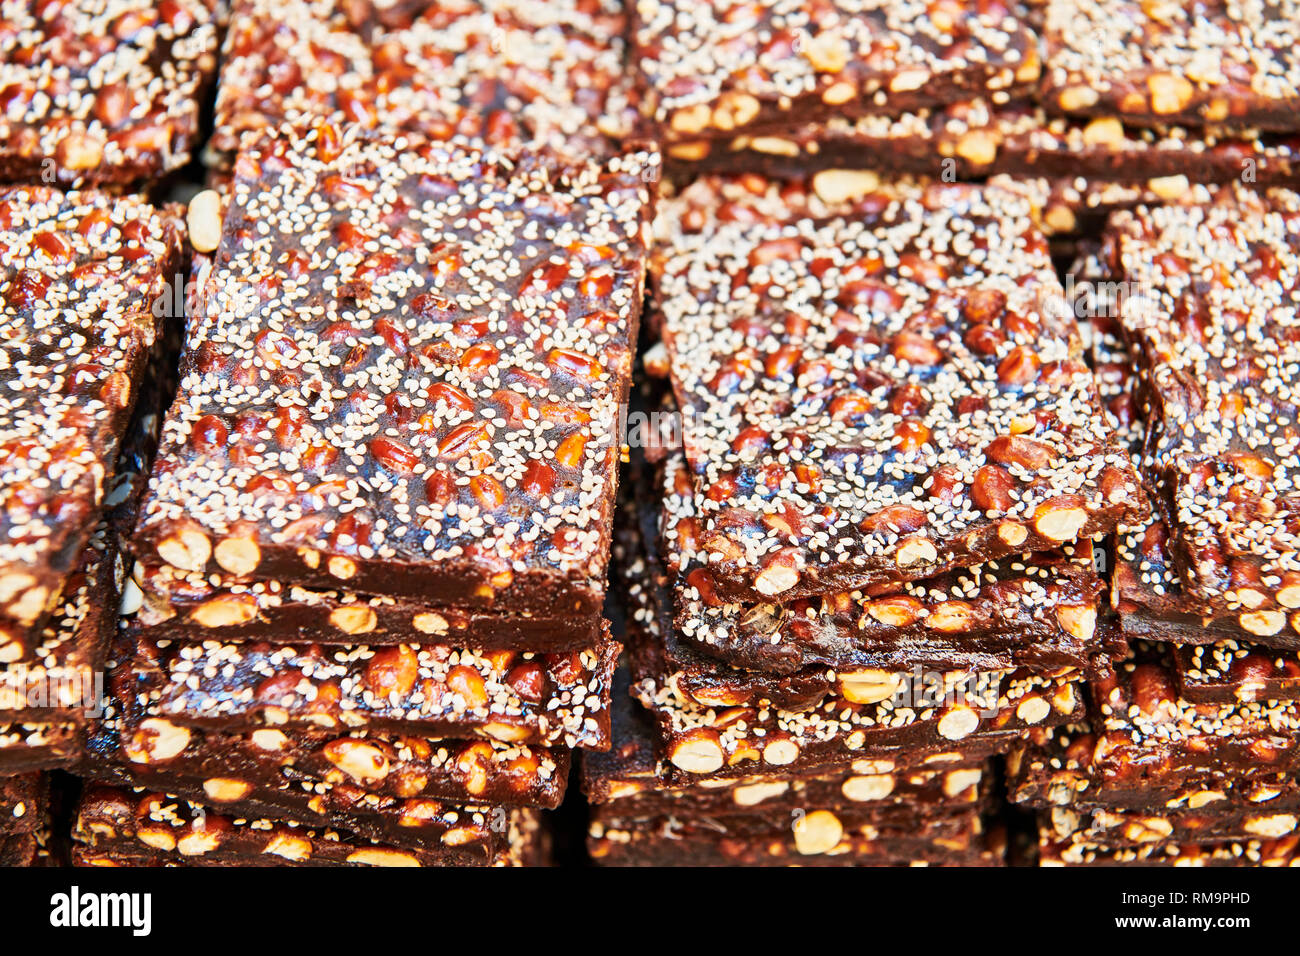 A pile of peanut brittle bars covered with sesame seeds for sale at a market in the Philippines Stock Photo